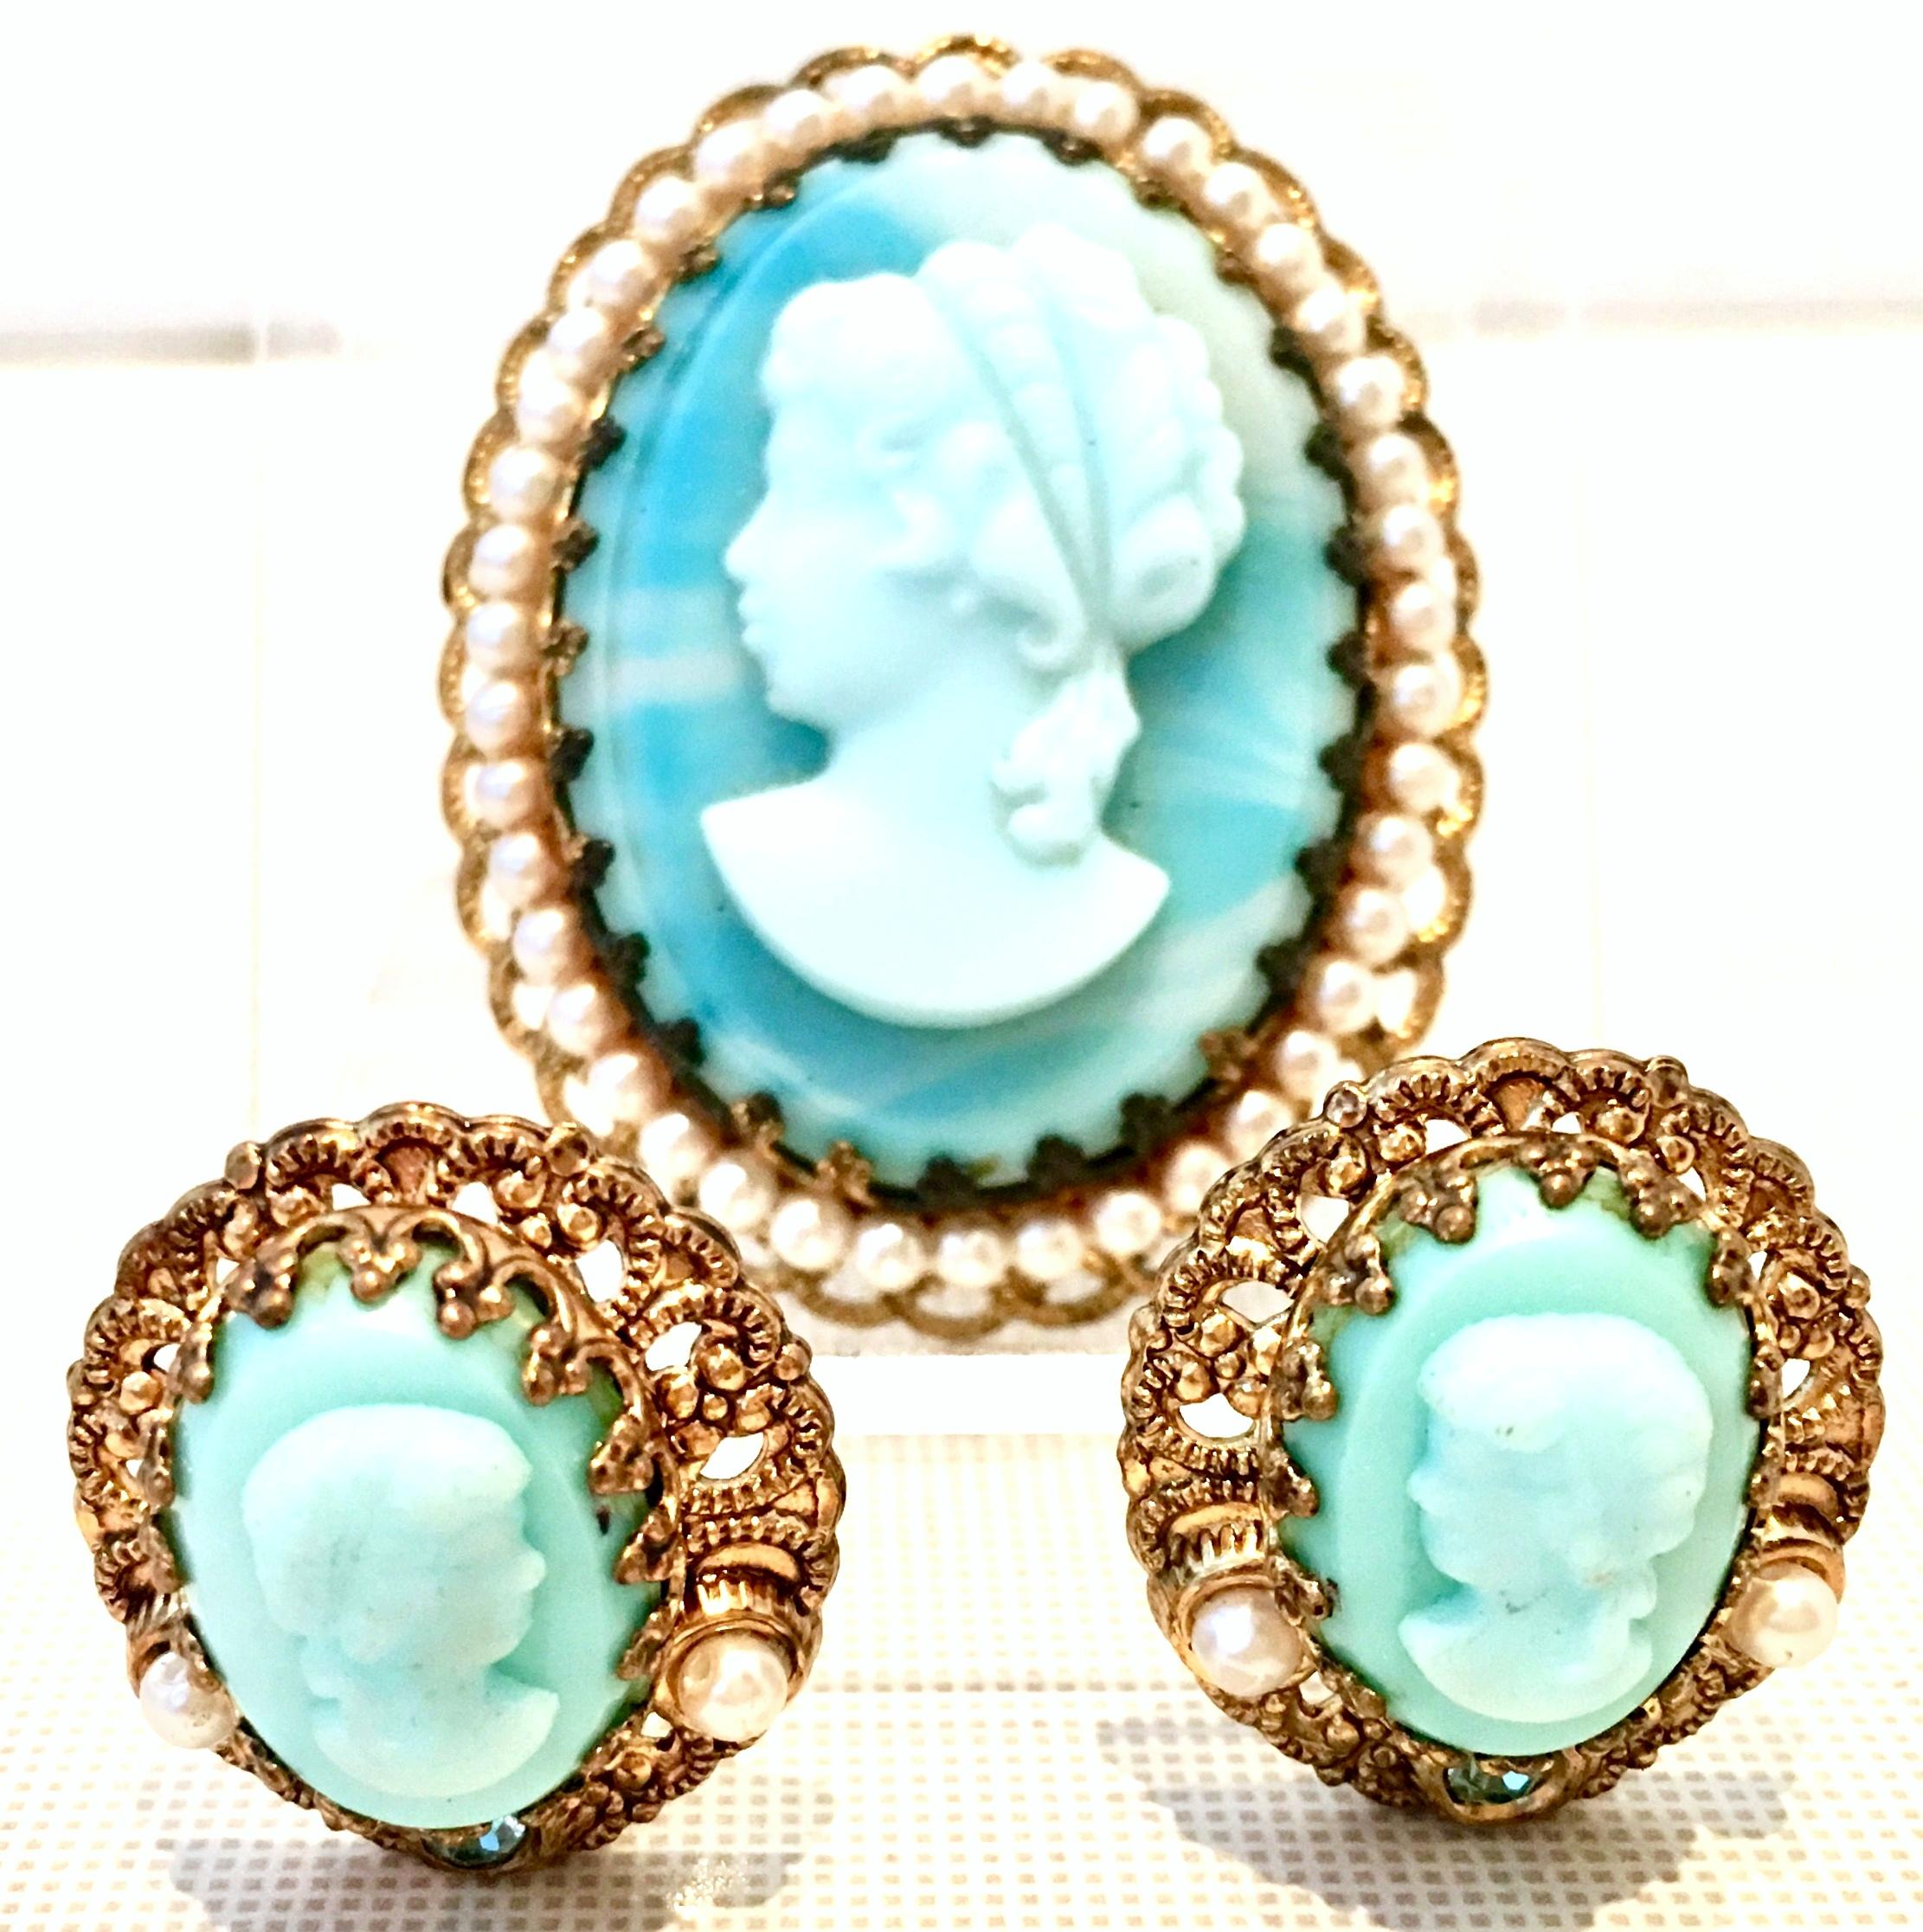 1950'S Germany, gold plate carved robins egg blue glass and faux pearl bead demi-parure brooch and earrings set. This three piece set features a left facing girl carved glass cameo, prong set in gold plate filigree with faux pearl bead surround. The